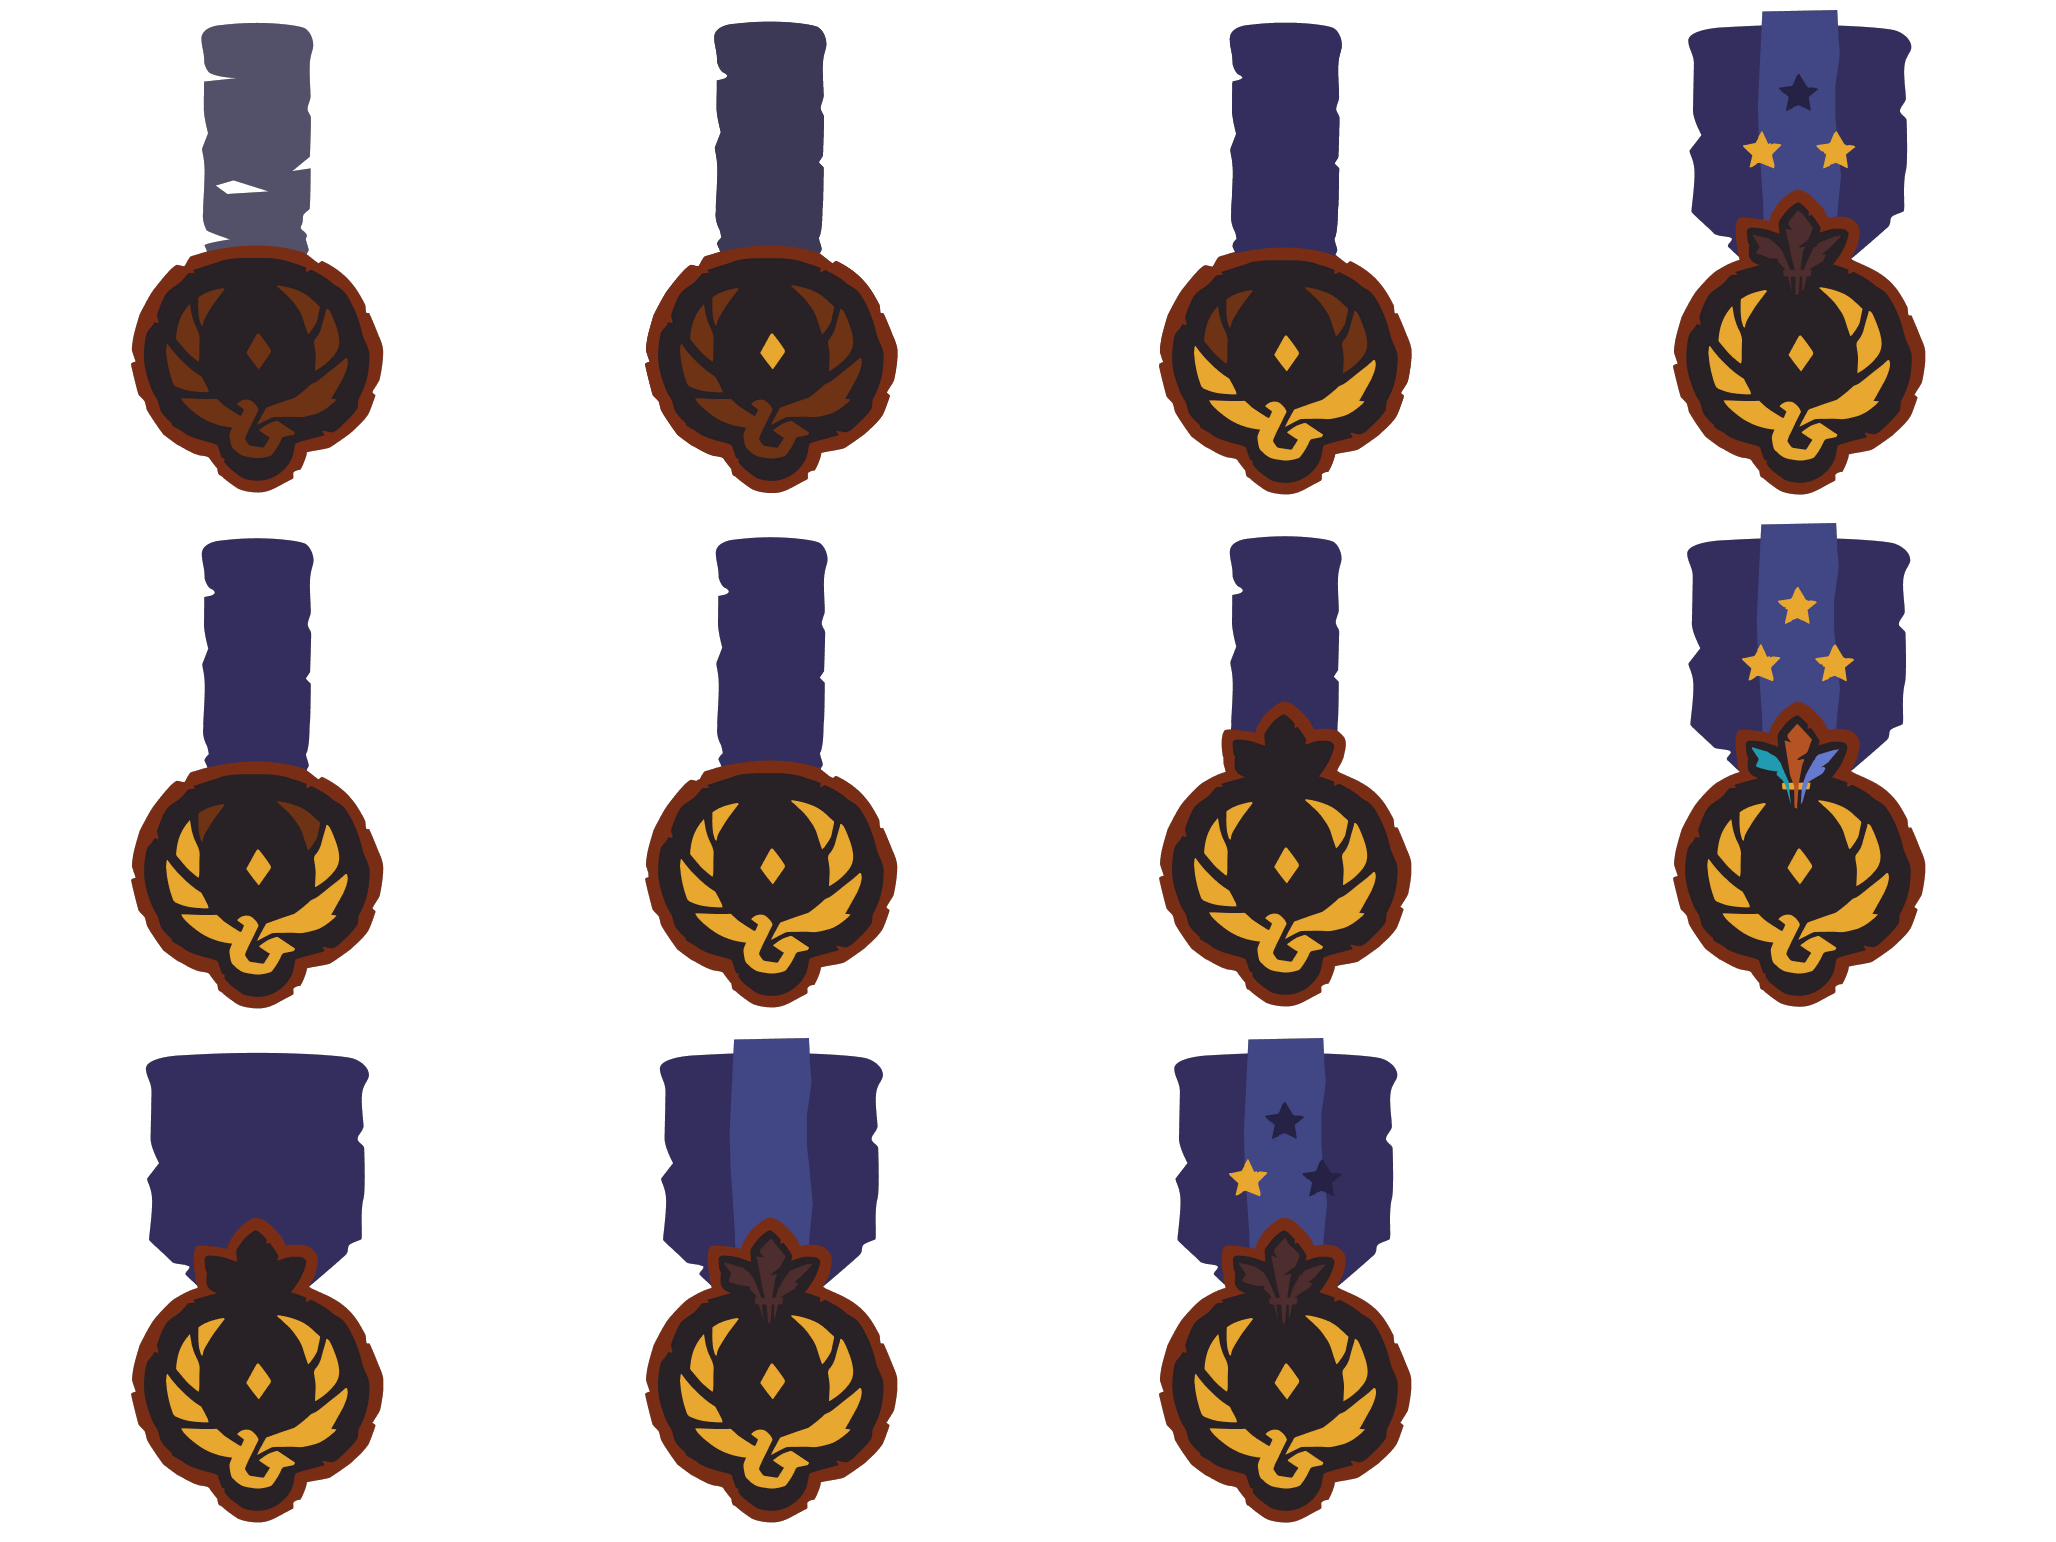 Sea of Thieves - Rank Ribbons (Sea Dogs)